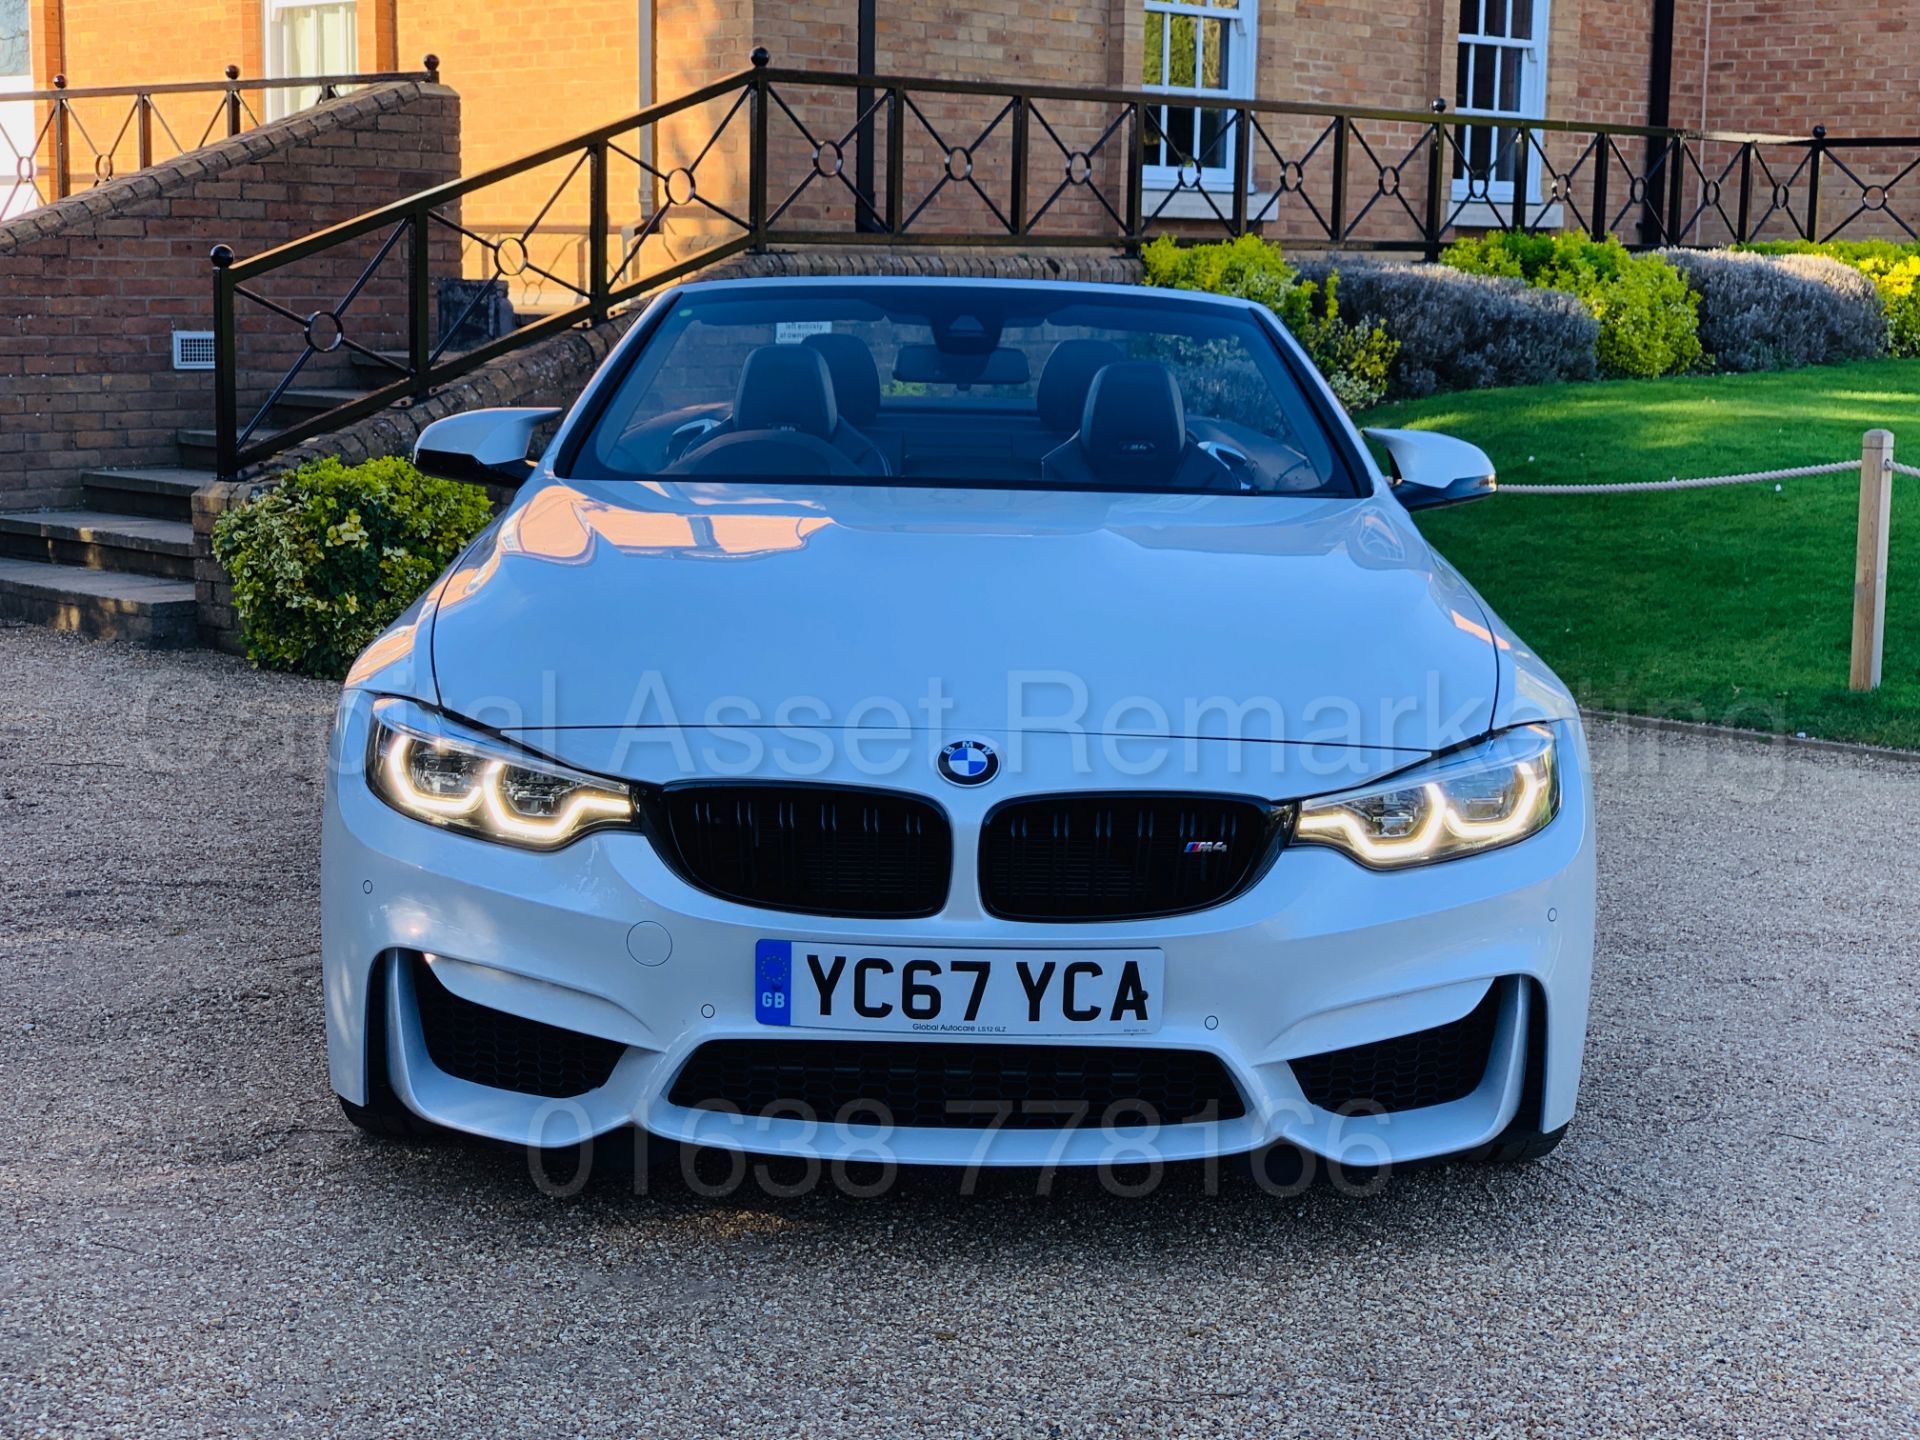 ON SALE BMW M4 CONVERTIBLE *COMPETITION PACKAGE* (2018 MODEL) '431 BHP - M DCT AUTO' WOW!!!!! - Image 23 of 89